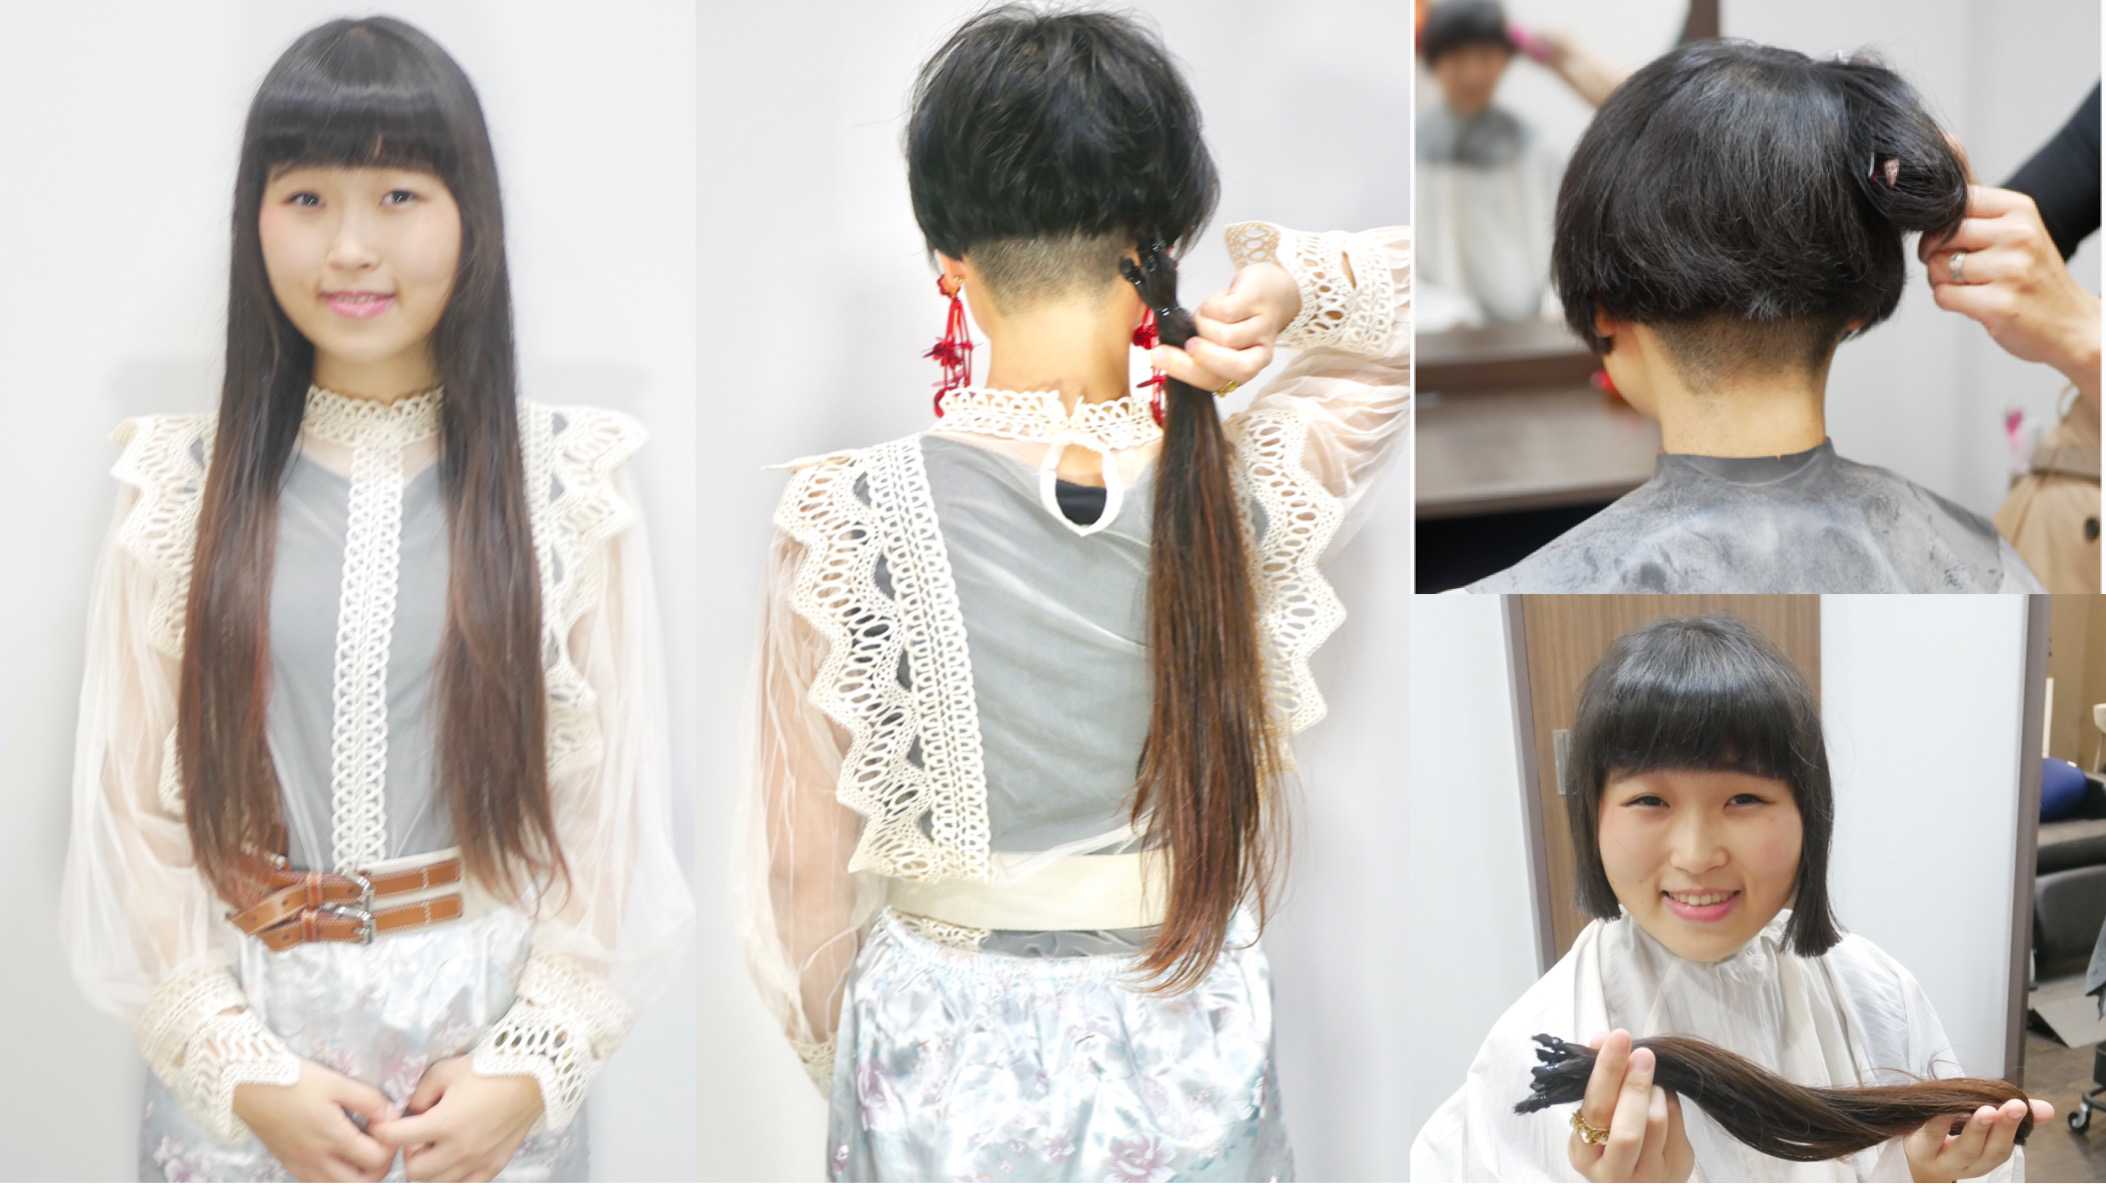 J77 23歳 人生初めてのショートは刈上げでした。Japanese beauty long to cropped haircut.　